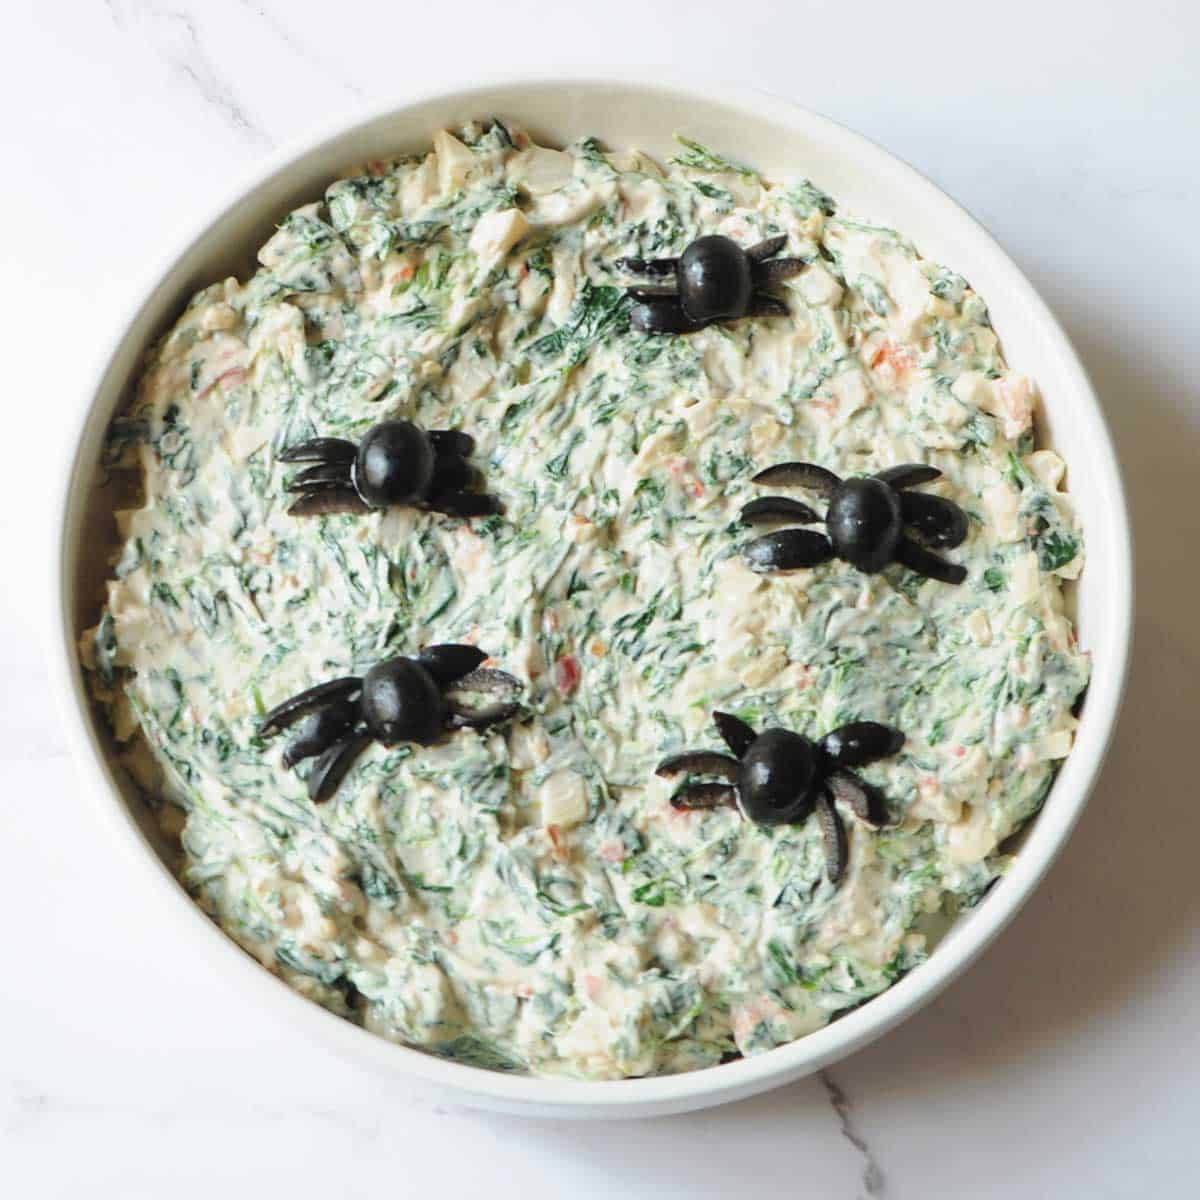 spinach dip with olives that were cut out to look like spiders in it 